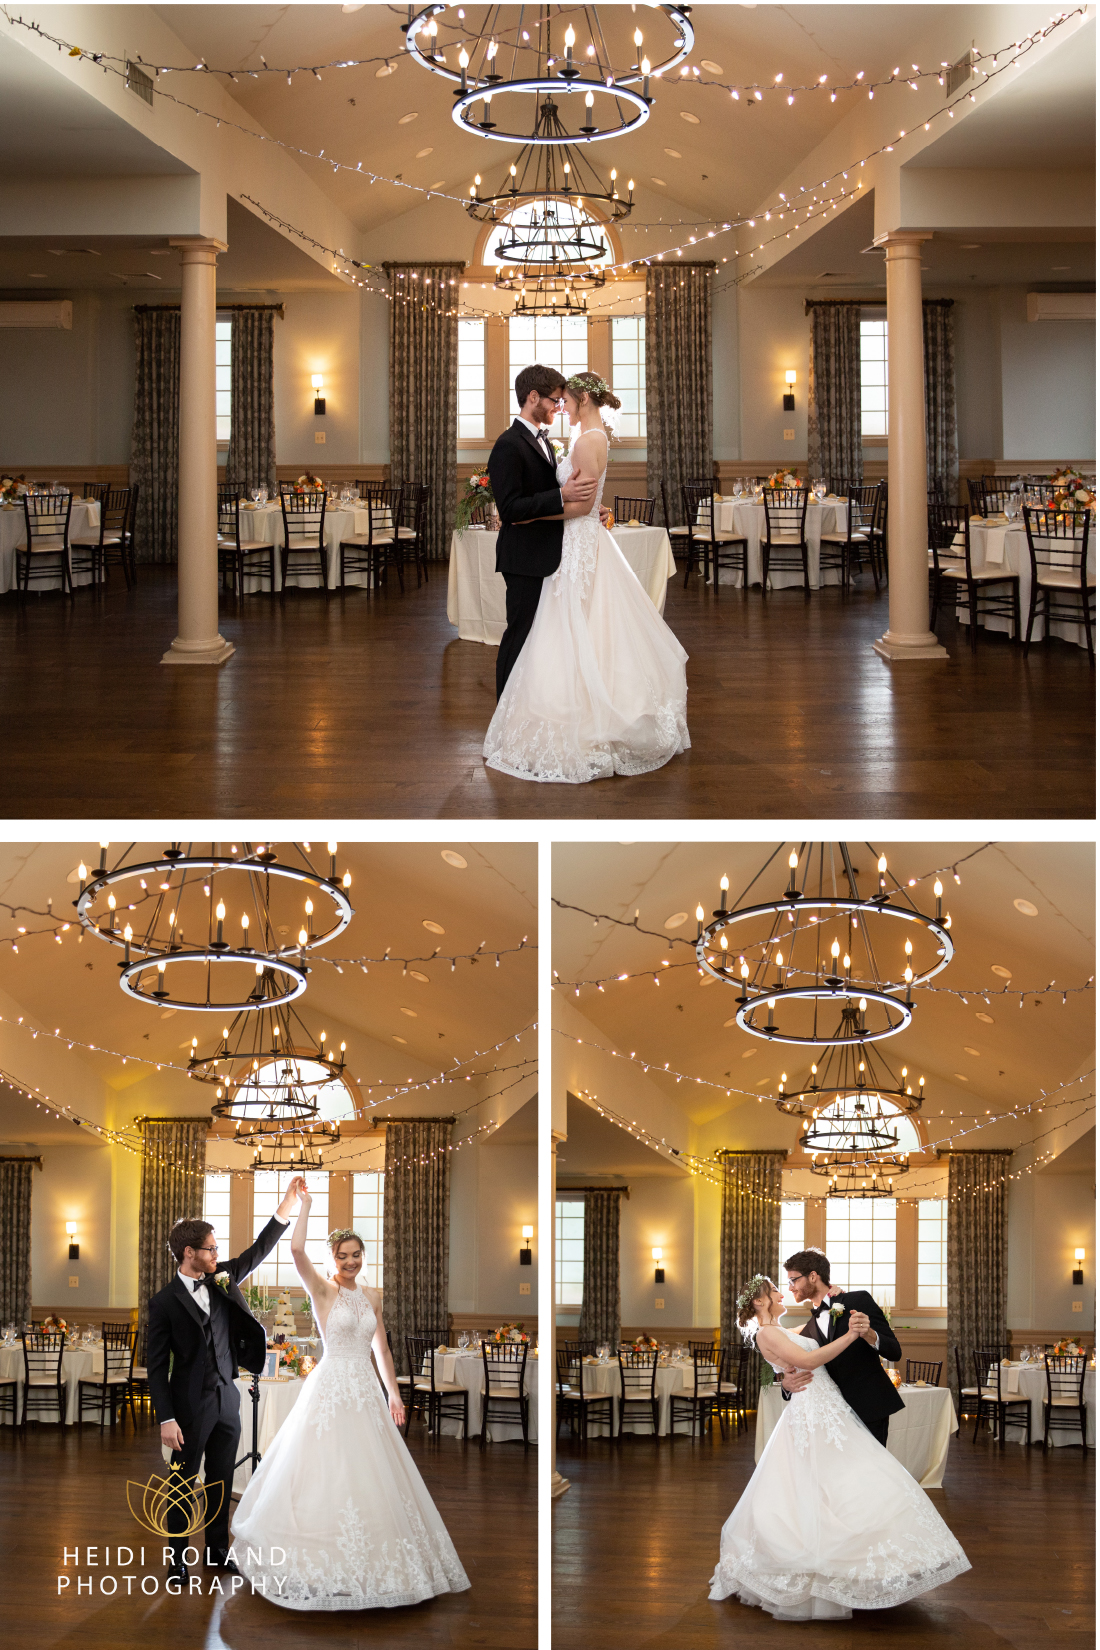 Bride and Groom dancing together before guests arrived for their Joseph Ambler Inn wedding reception 